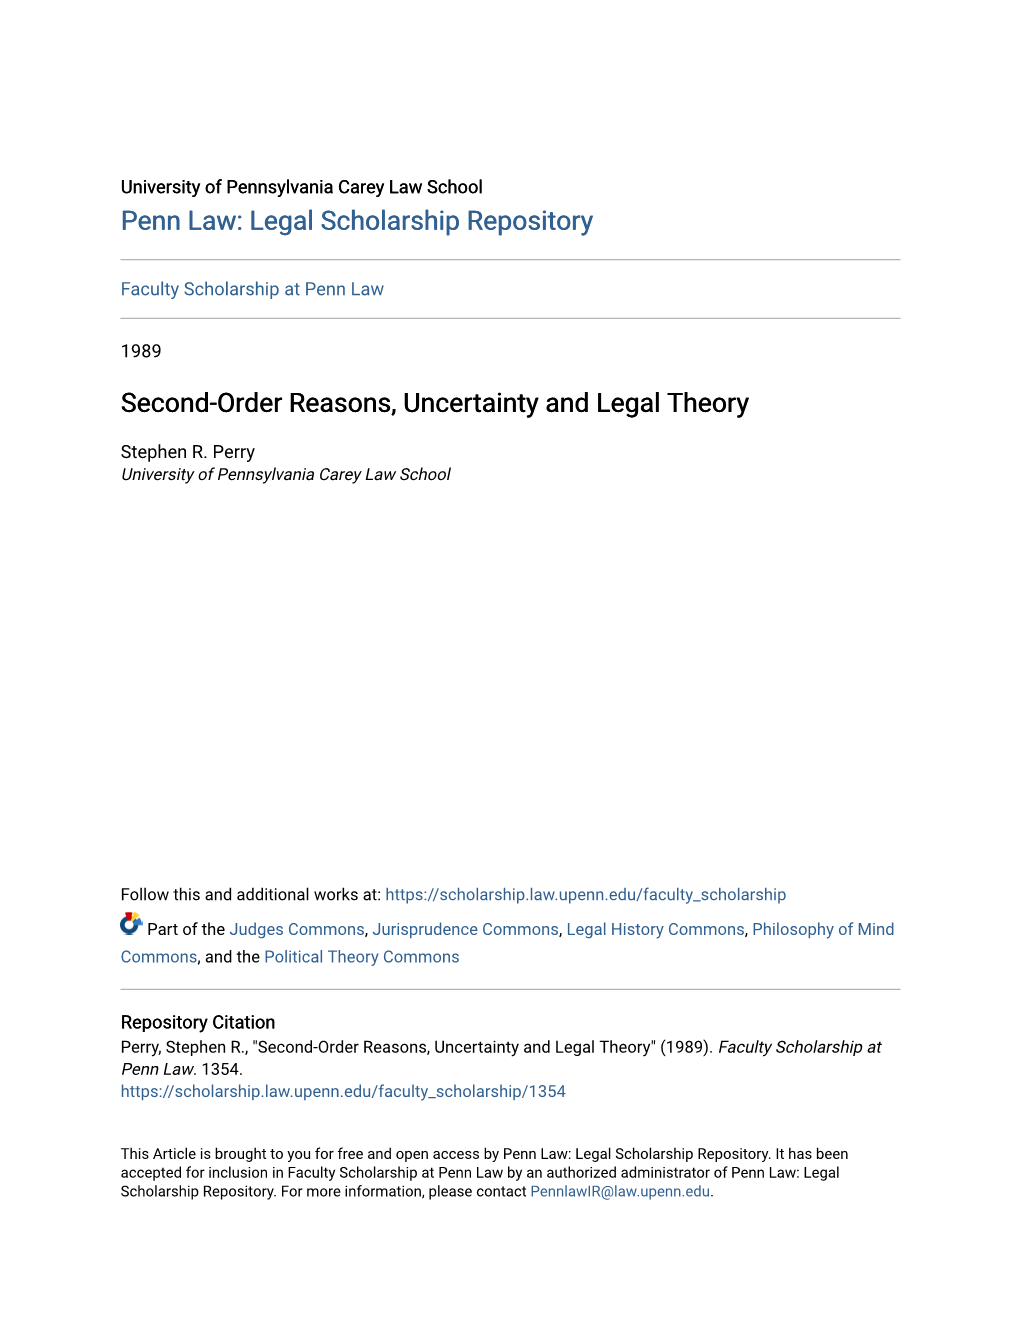 Second-Order Reasons, Uncertainty and Legal Theory